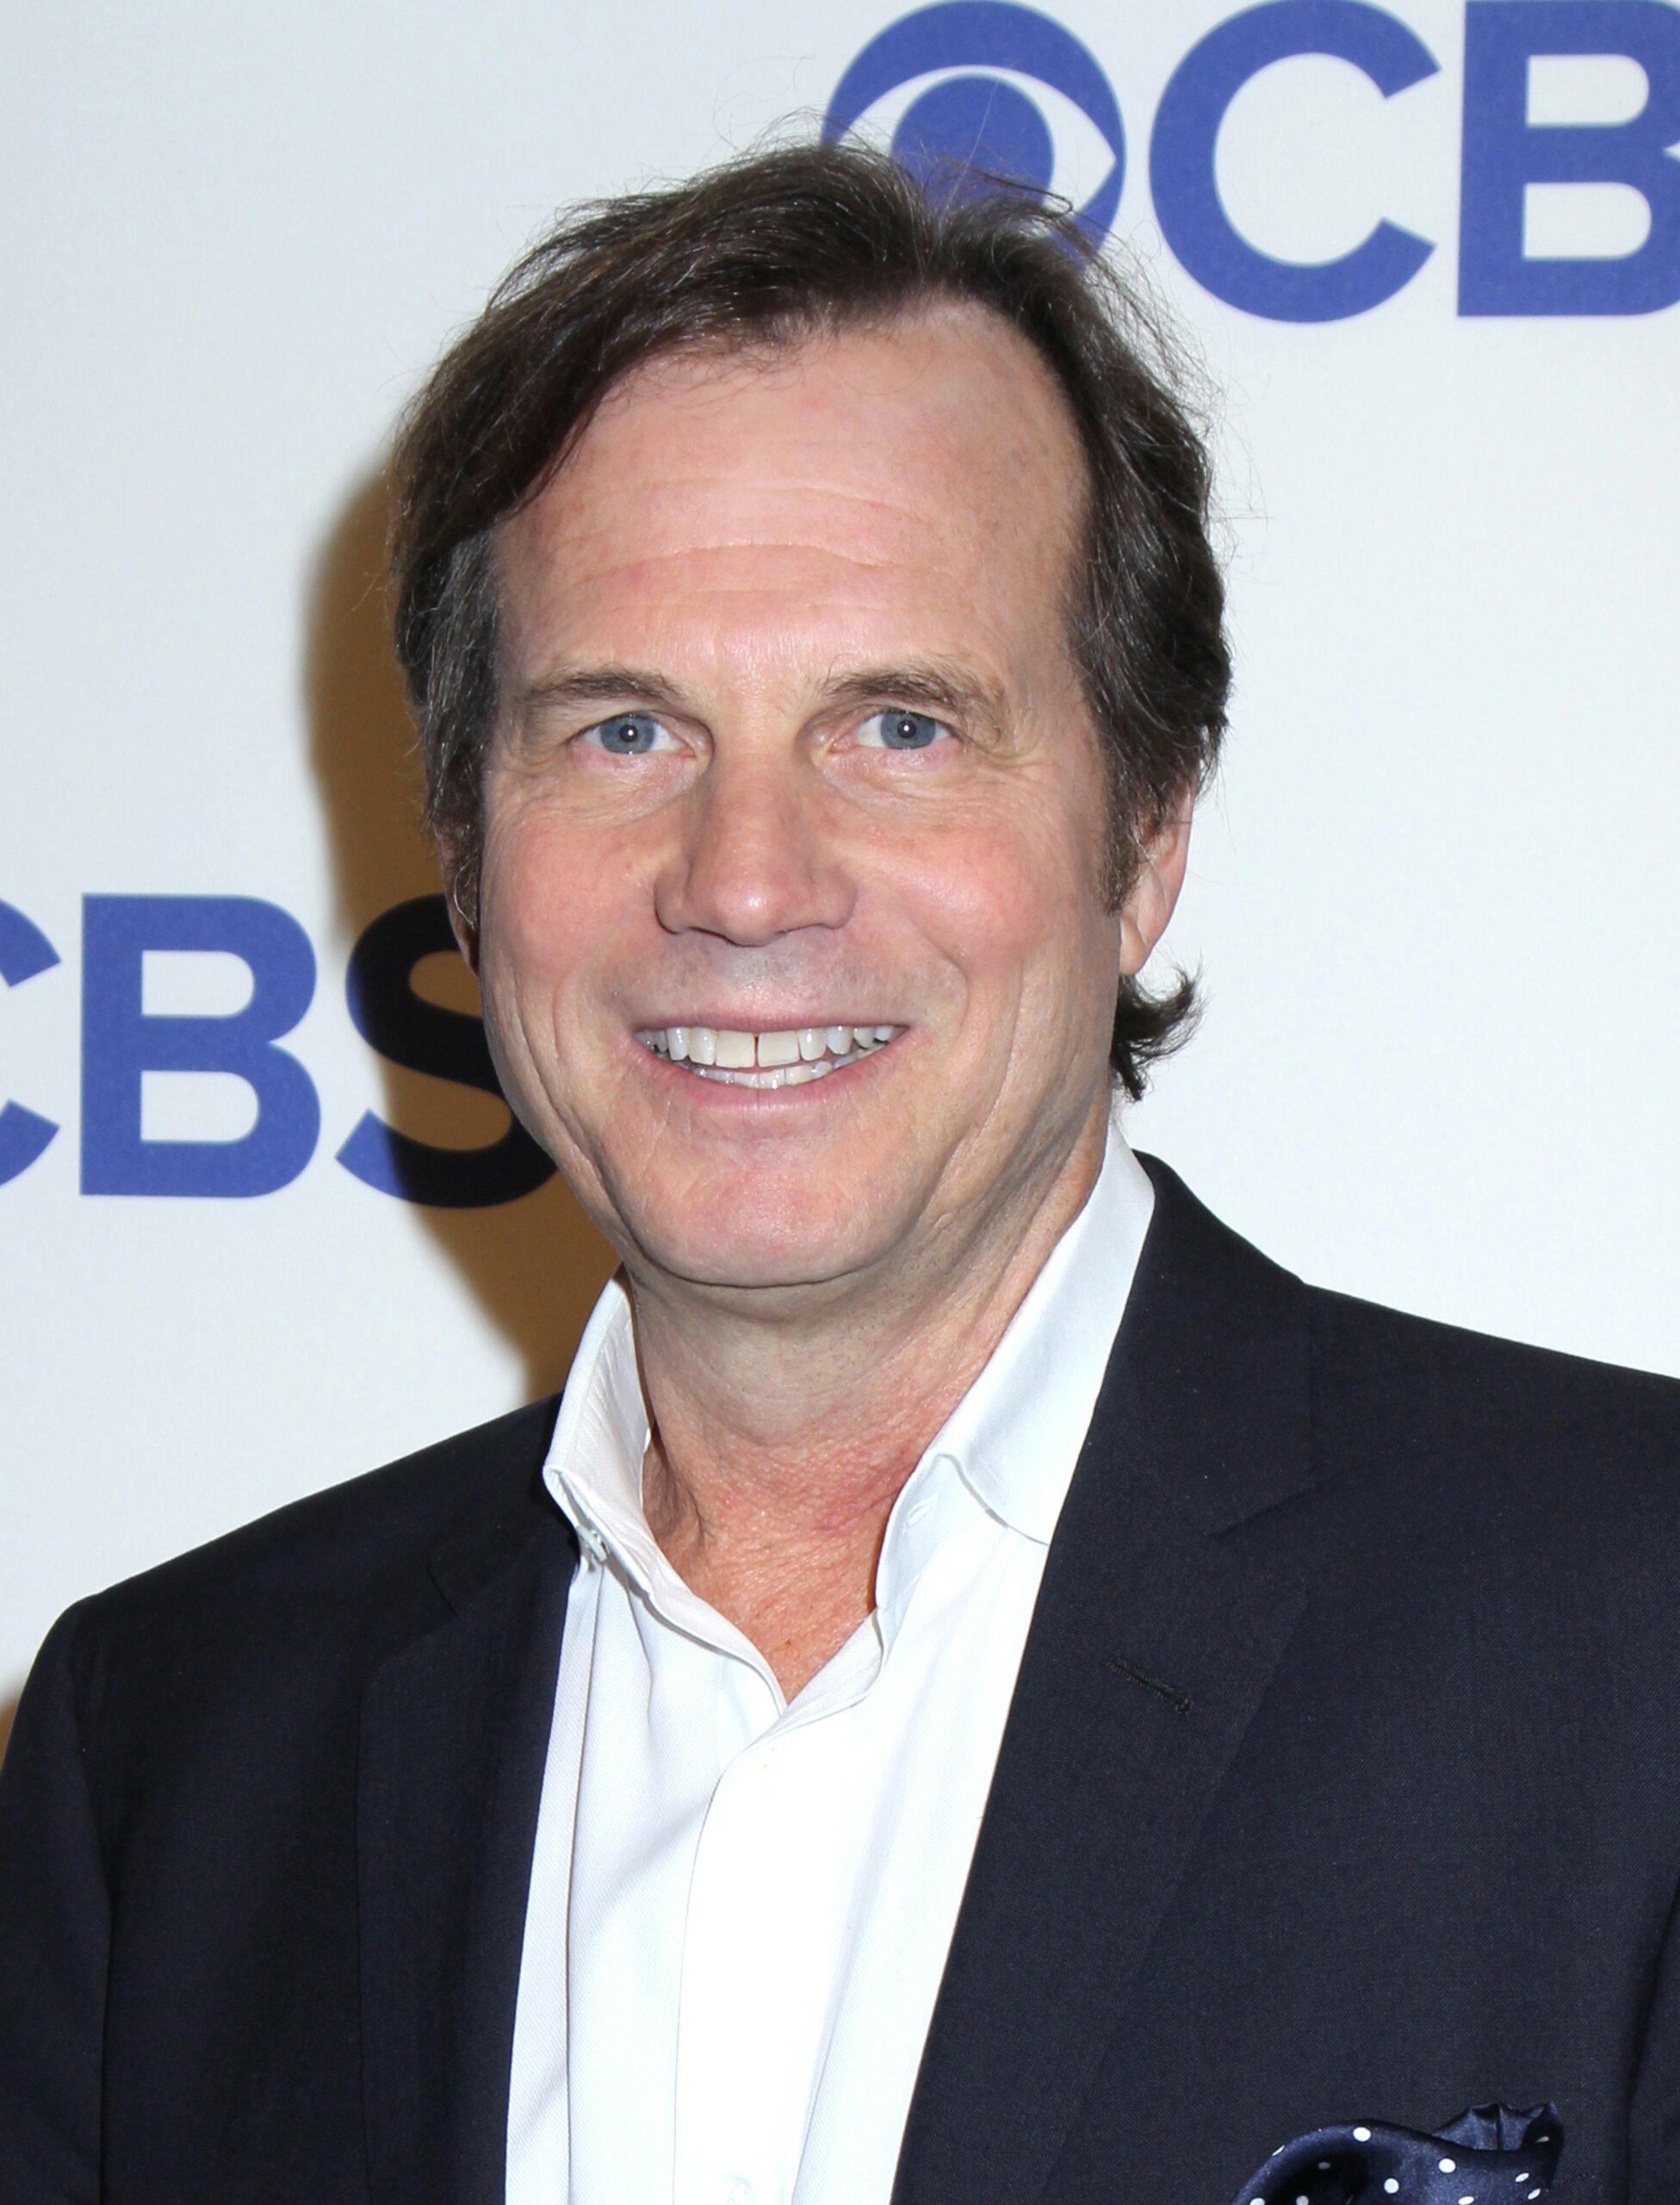 Actor Bill Paxton has died at the age of 61